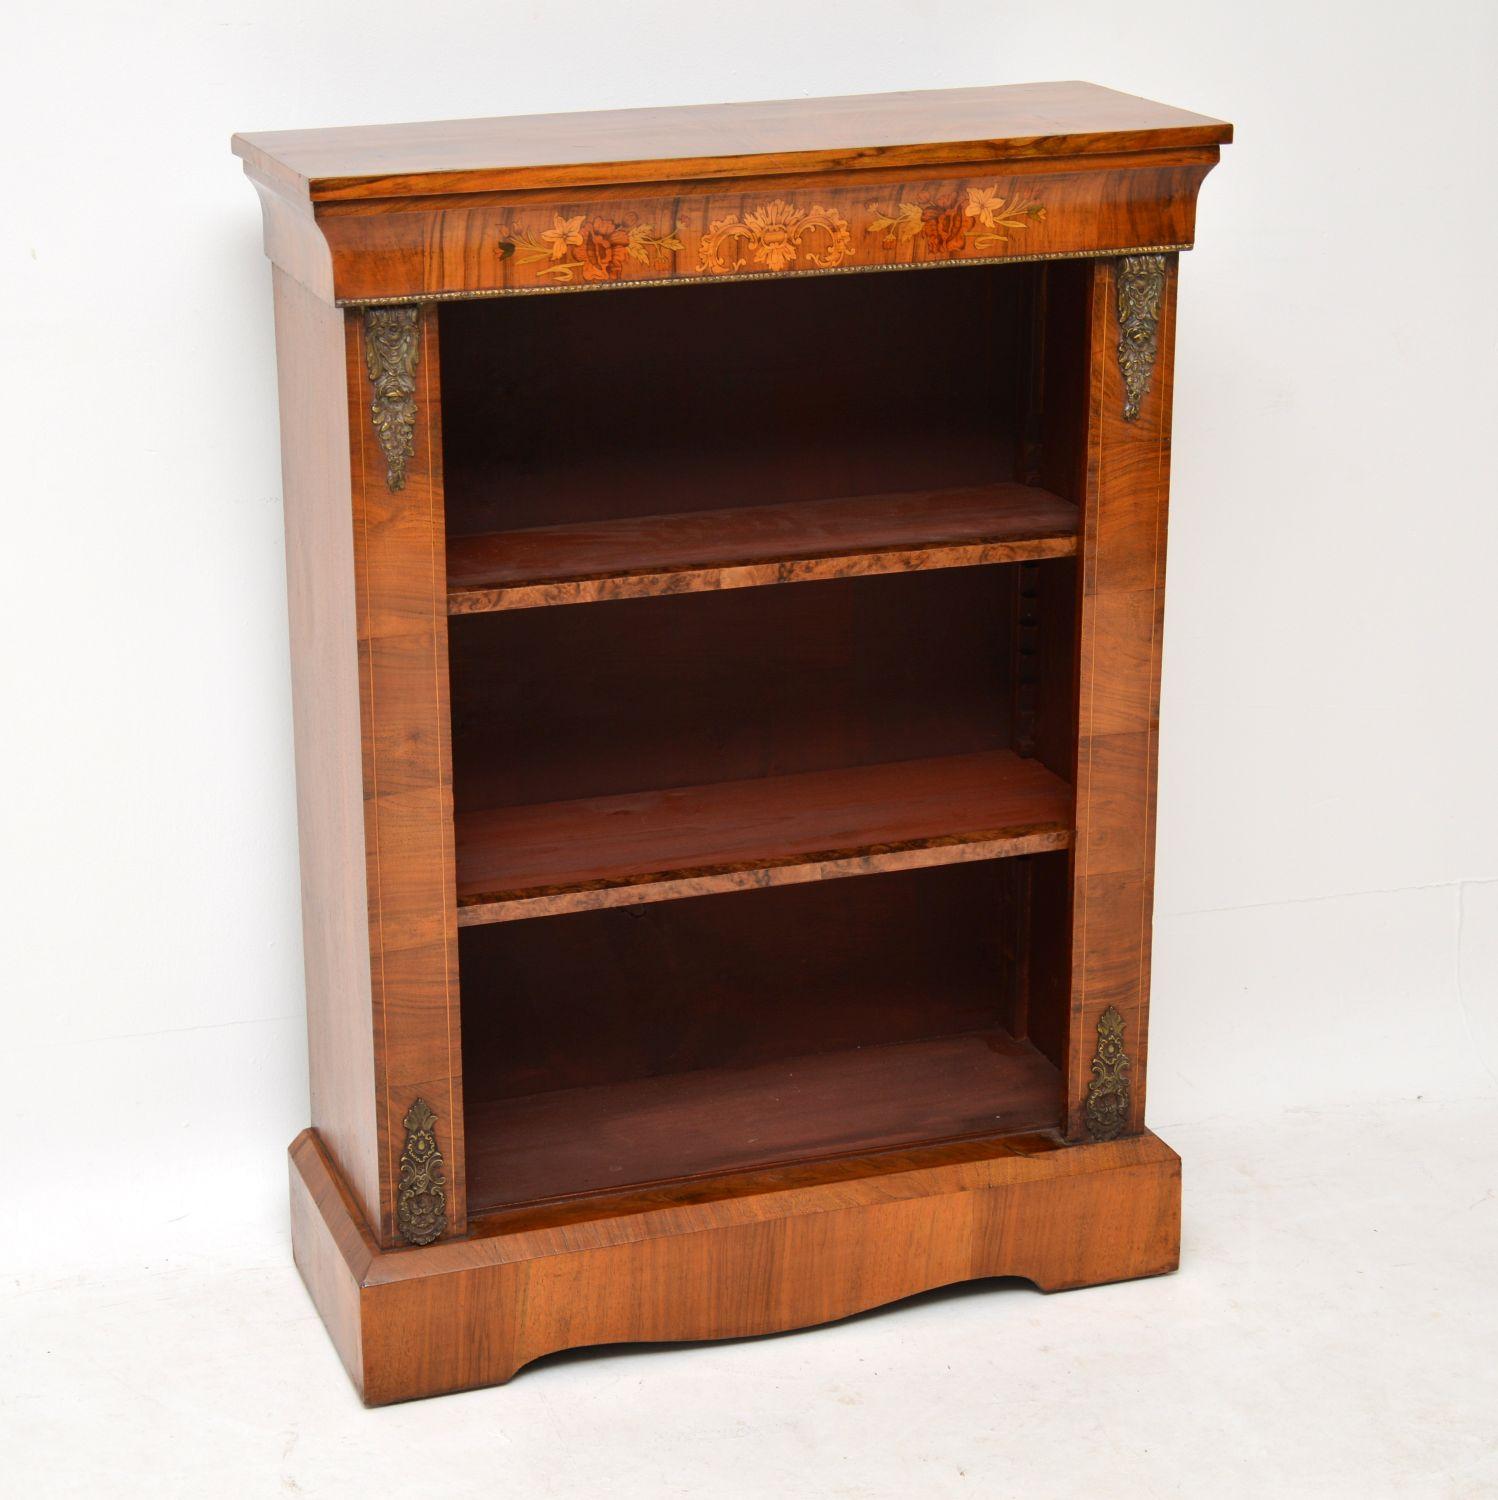 Antique Victorian figured walnut open bookcase dating from circa 1860-1880s period and in good condition. It has a concave top section with some exquisite floral marquetry made up from many exotic woods. The shelves are adjustable on sharks teeth